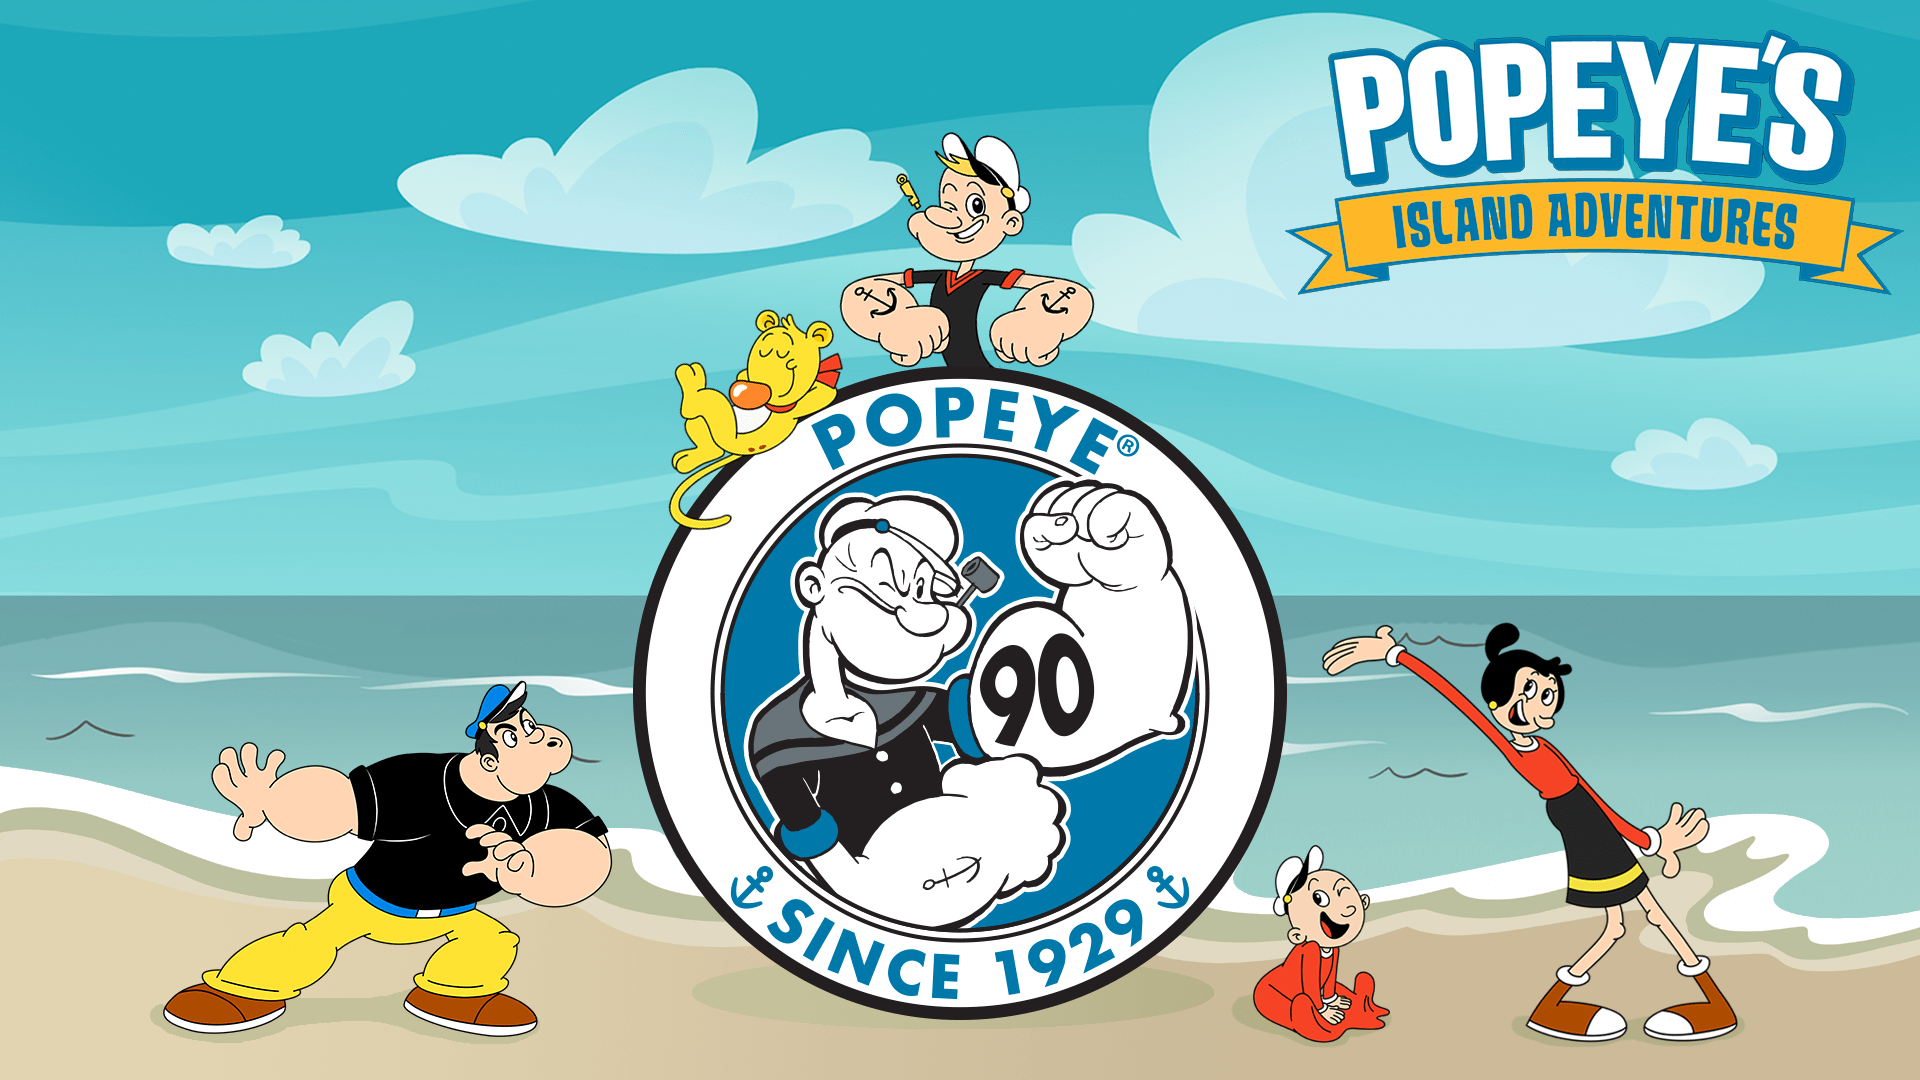 Popeye | Timeline: The History of Popeye & His Friends